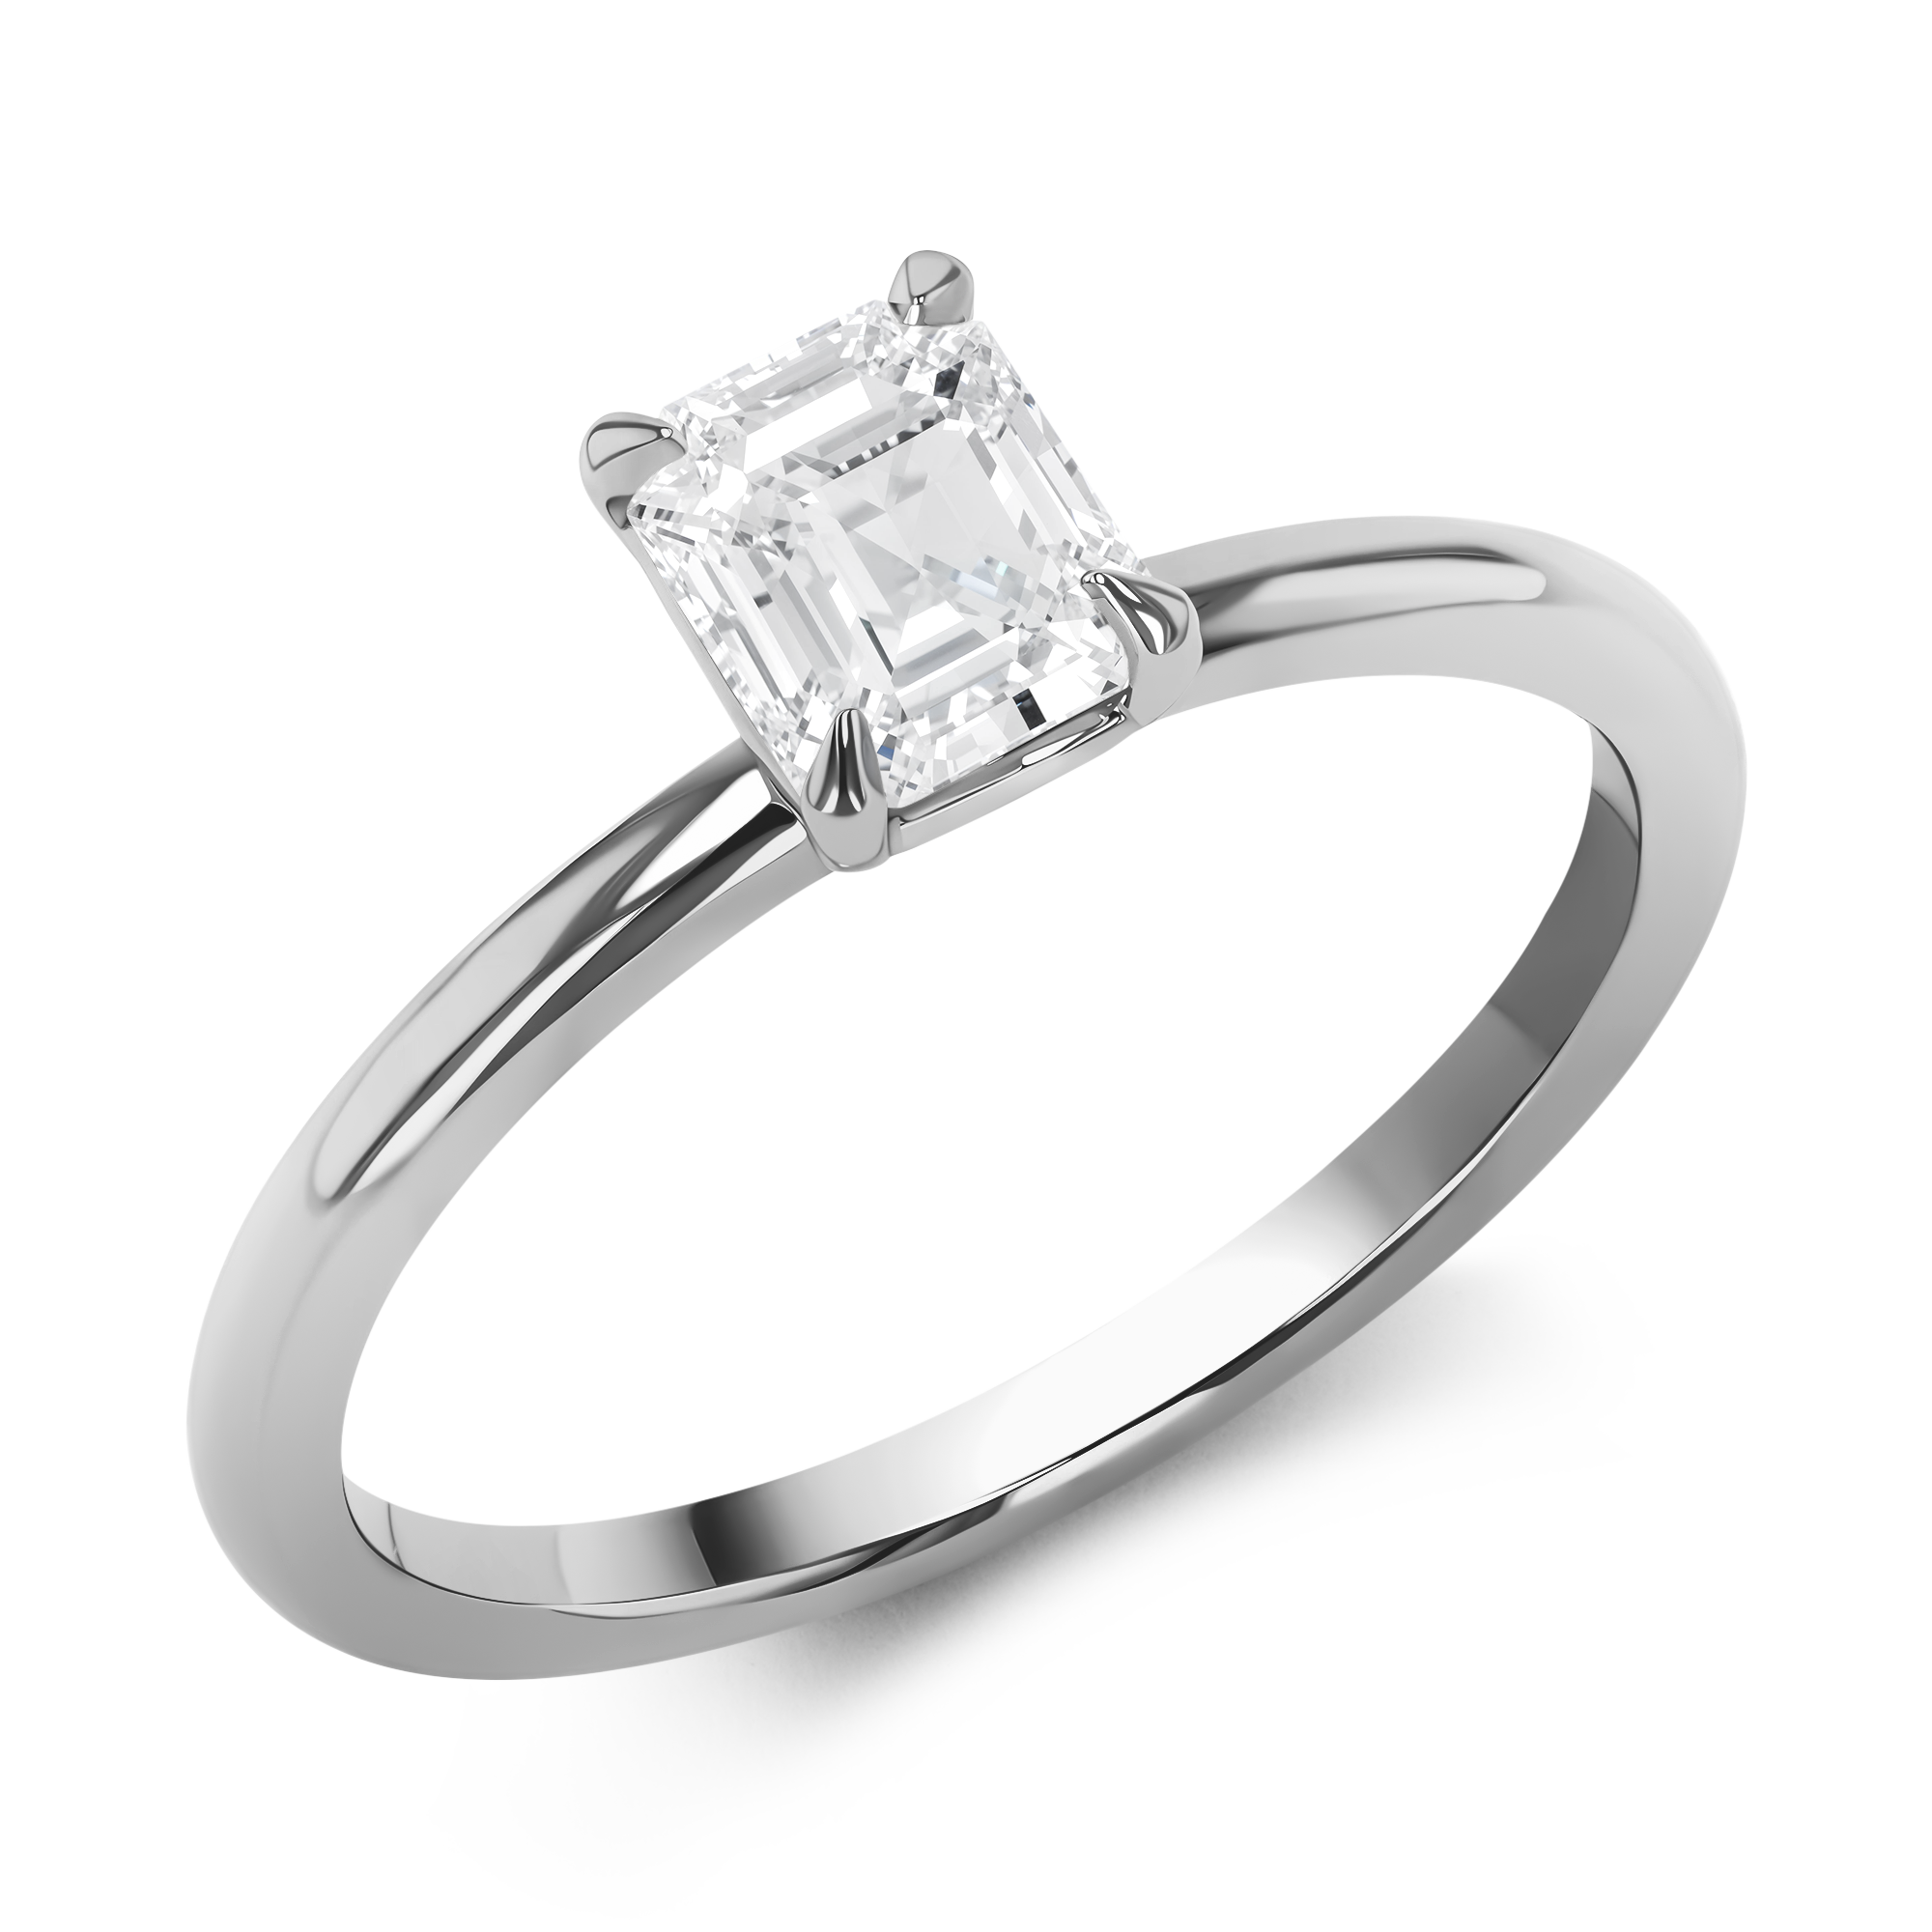 Contemporary 0.83ct Diamond Solitaire Ring Emerald Cut, Claw Set_1